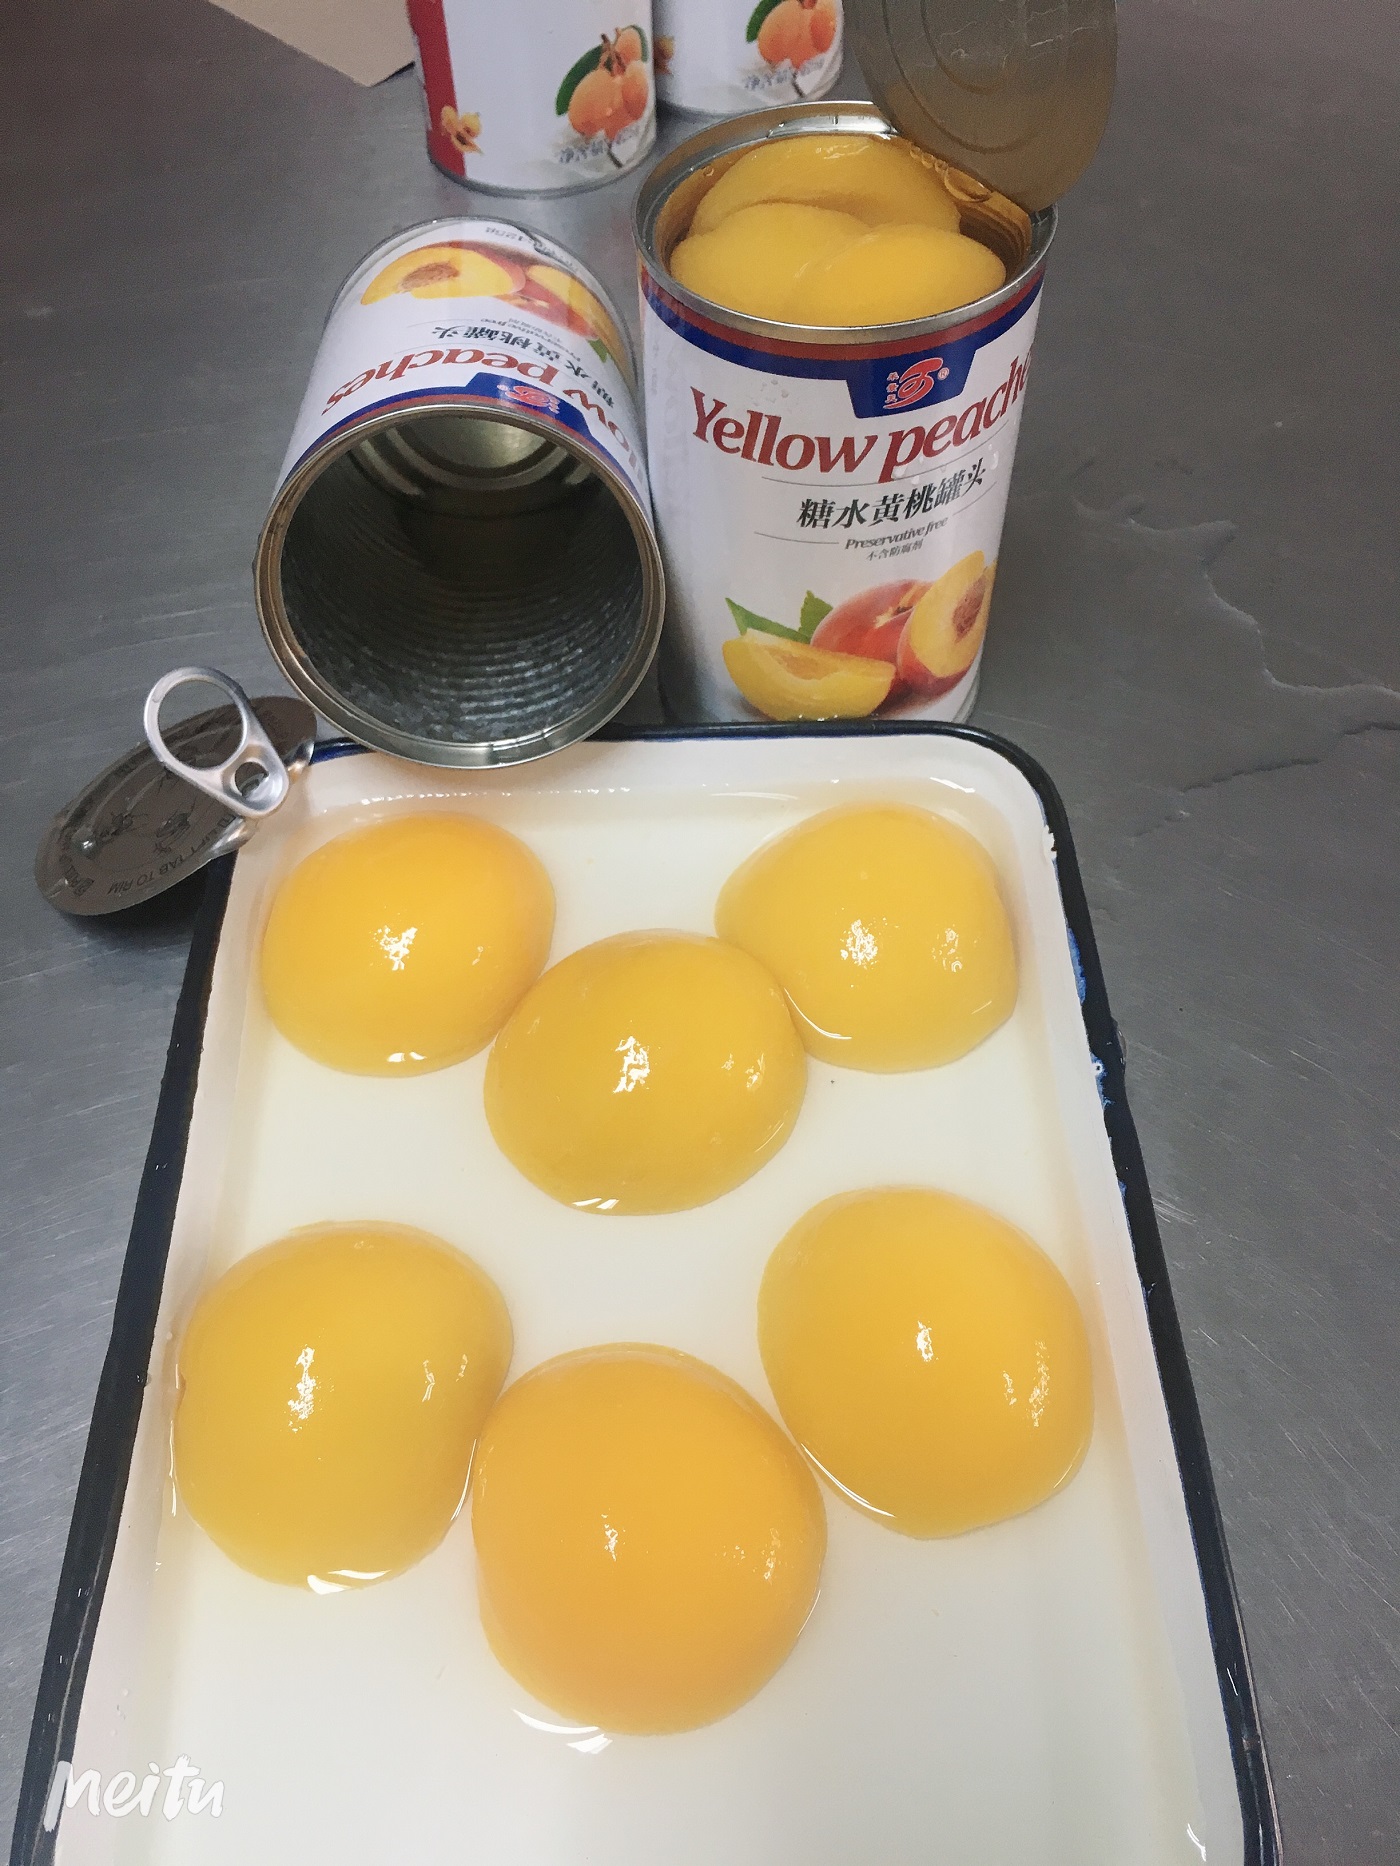 Canned yellow peach half in light syrup